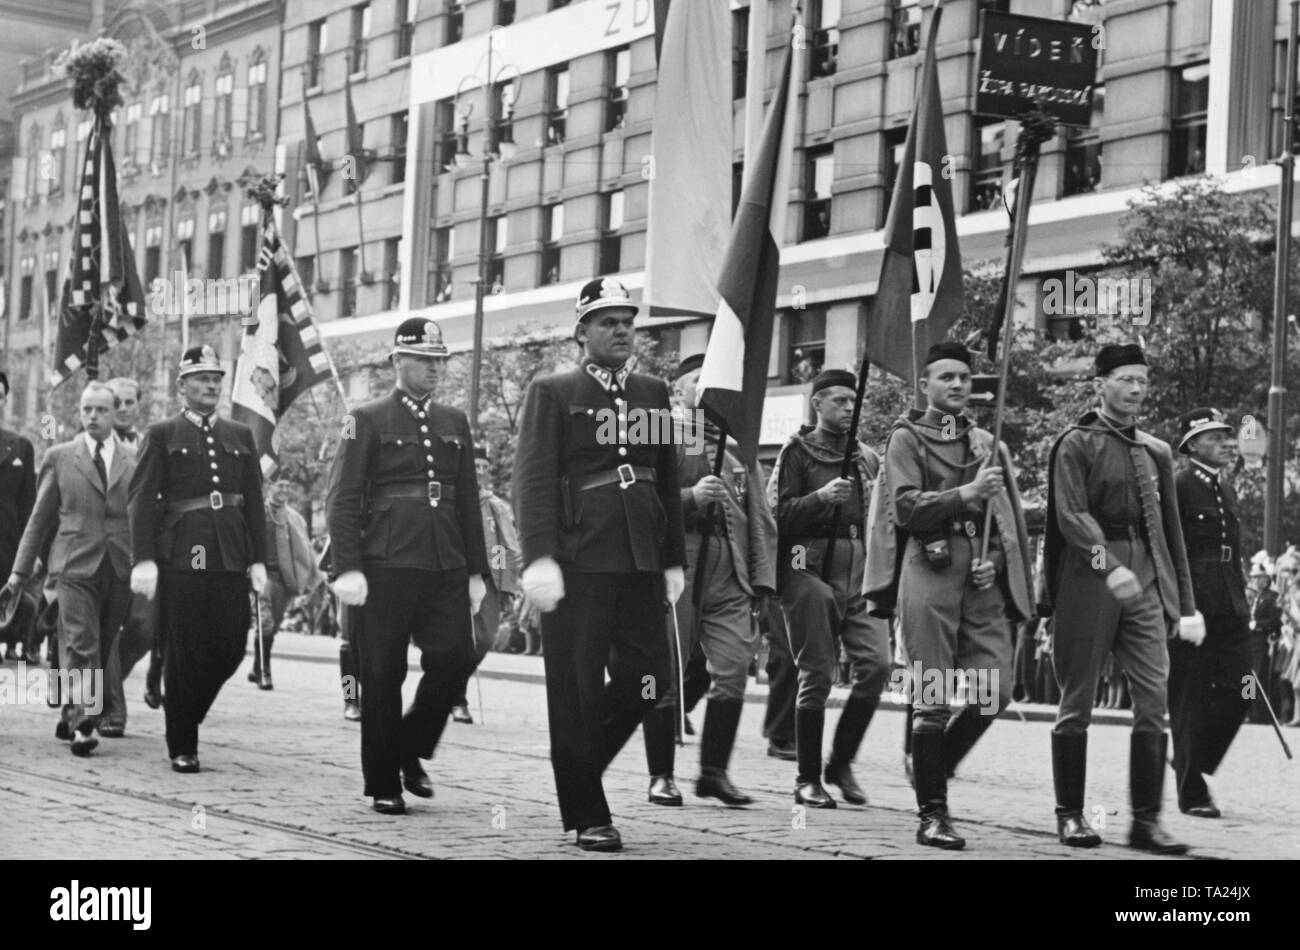 Congress of the Sokol movement in Prague. A parade will take place in the course of the event at Wenceslas Square. The Wiener Sokol Gruppe (Vienna Sokol Group) carries a swastika flag and the Czech flag. The swastika flag is accompanied by state troopers. The Sokol movement was a national and patriotic gymnastics organization. Stock Photo